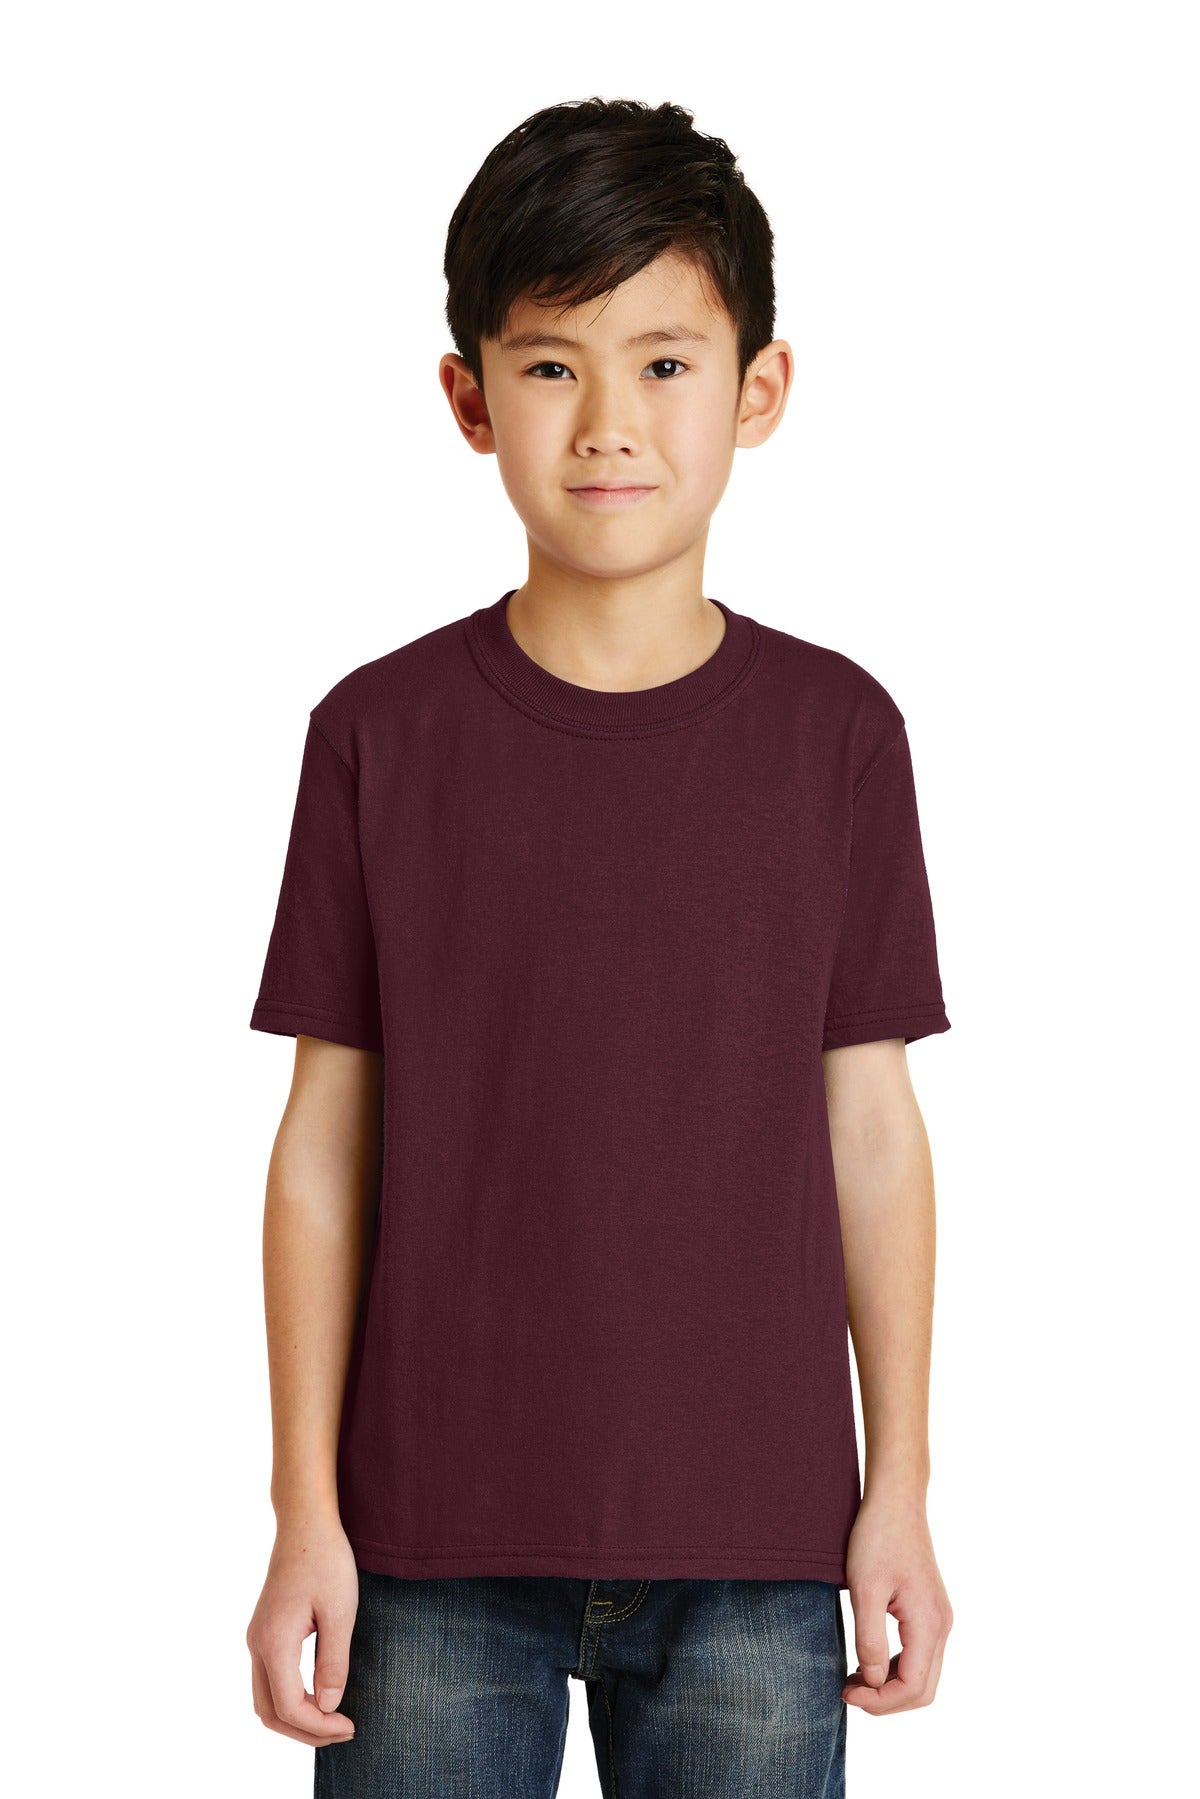 Port & Company?- Youth Core Blend Tee.  PC55Y